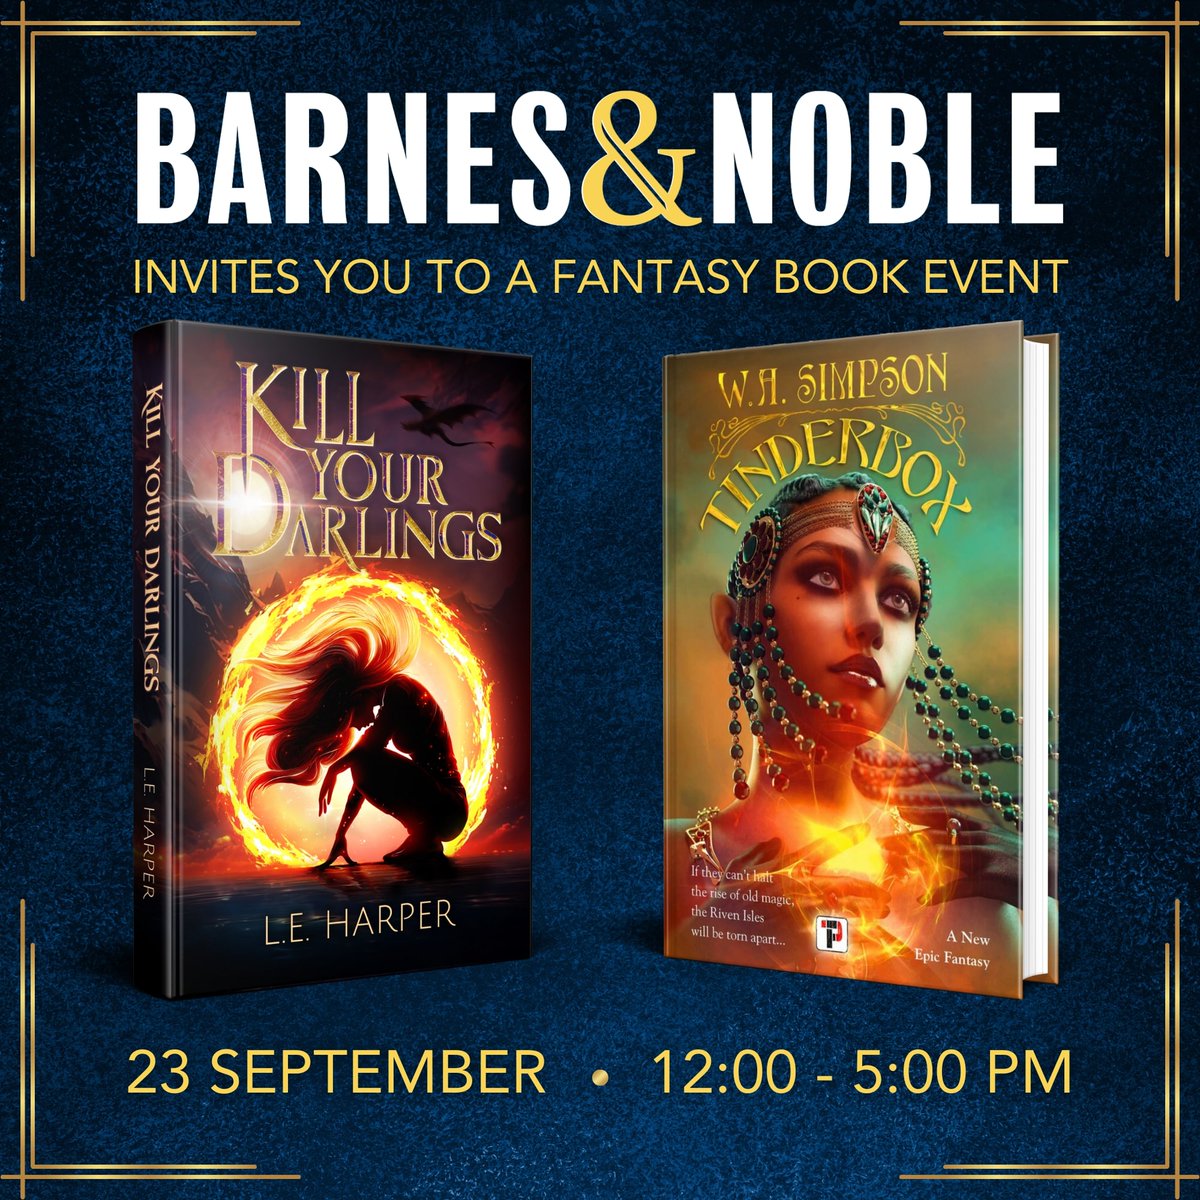 Join us for a Fantasy Book event TODAY from 12 PM to 5 PM with L.E. Harper (author of Kill Your Darlings) and W.A. Simpson (author of Tinderbox)! #BNWILMINGTON #KillYourDarlings #Tinderbox #BookEvent #Fantasy #BookSigning #WilmingtonDE